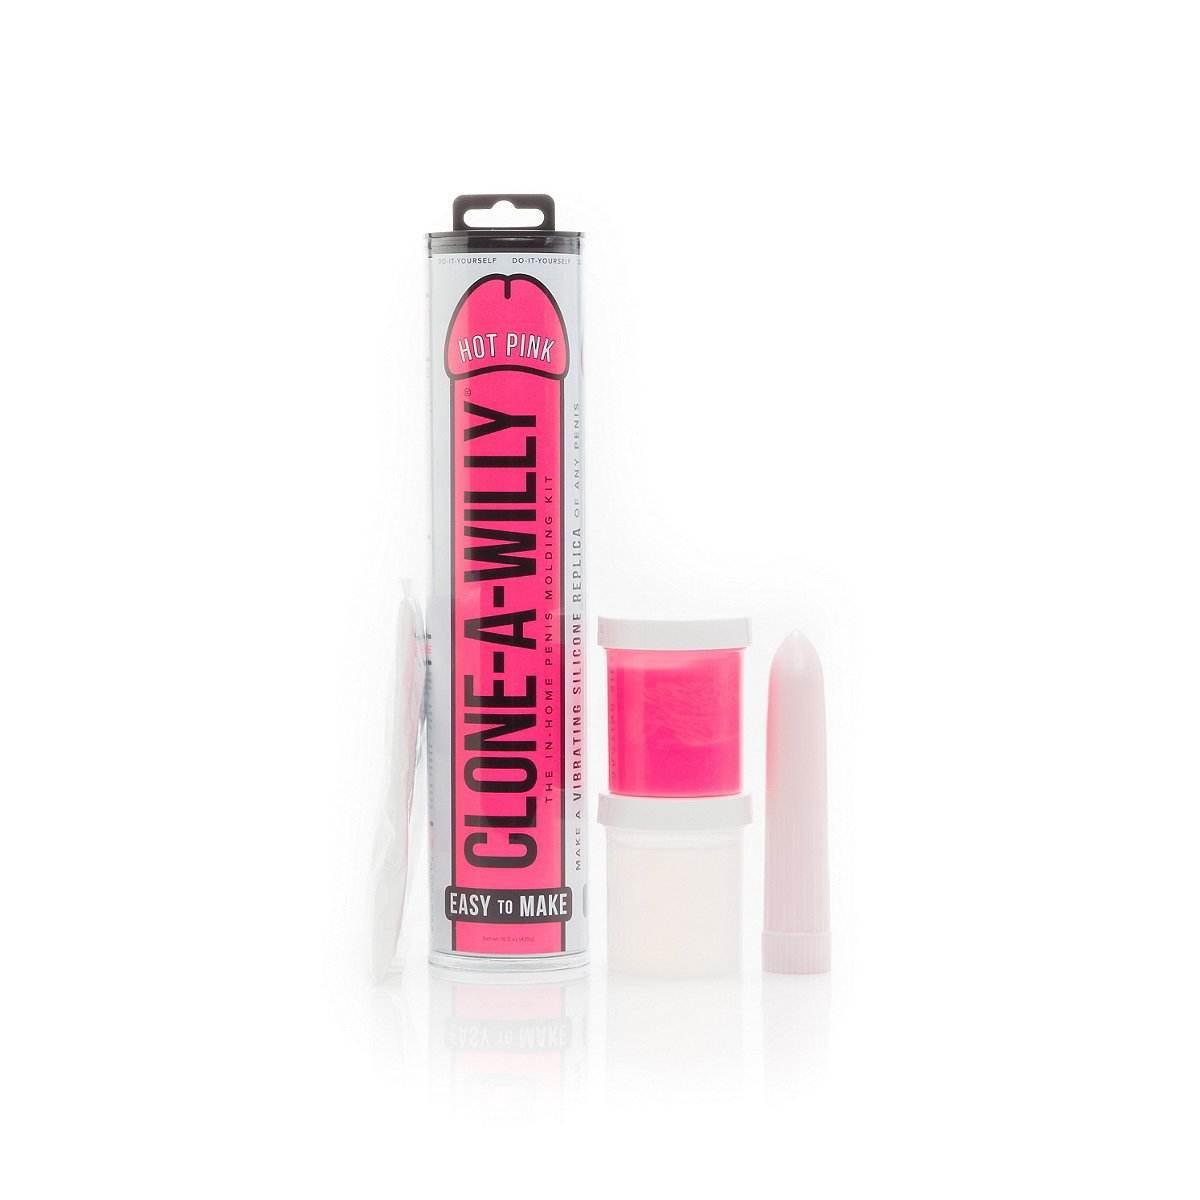 Clone-A-Willy Vibrator Kit - Hot Pink